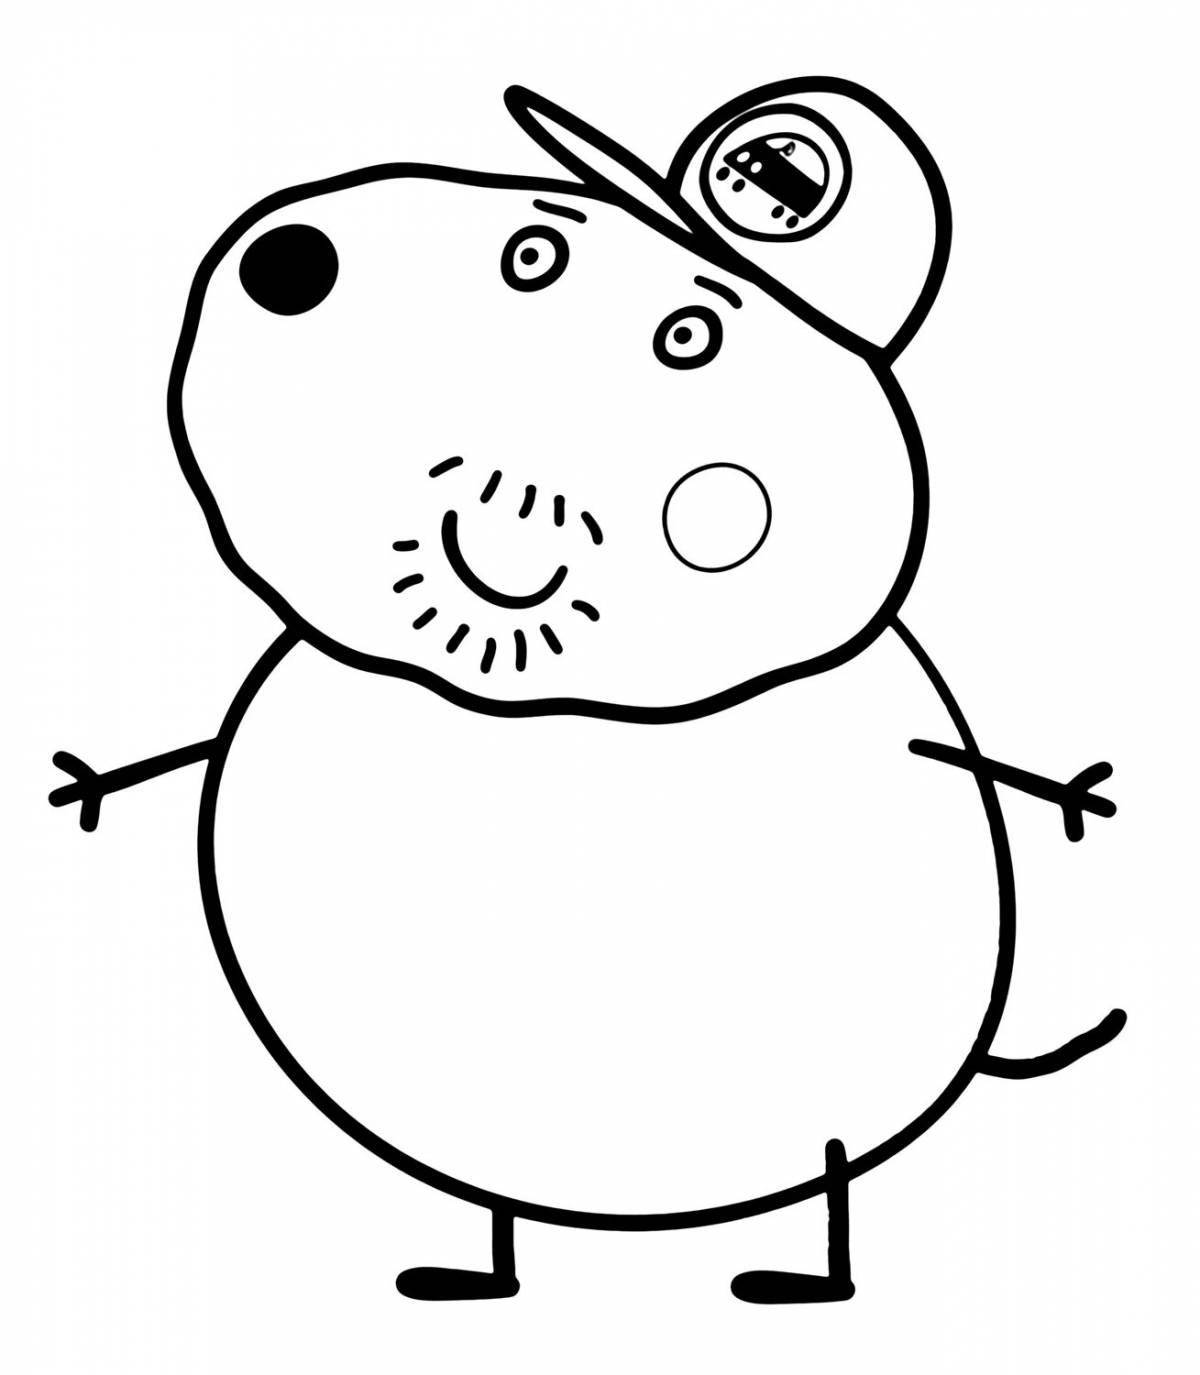 Fabulous daddy pig coloring page